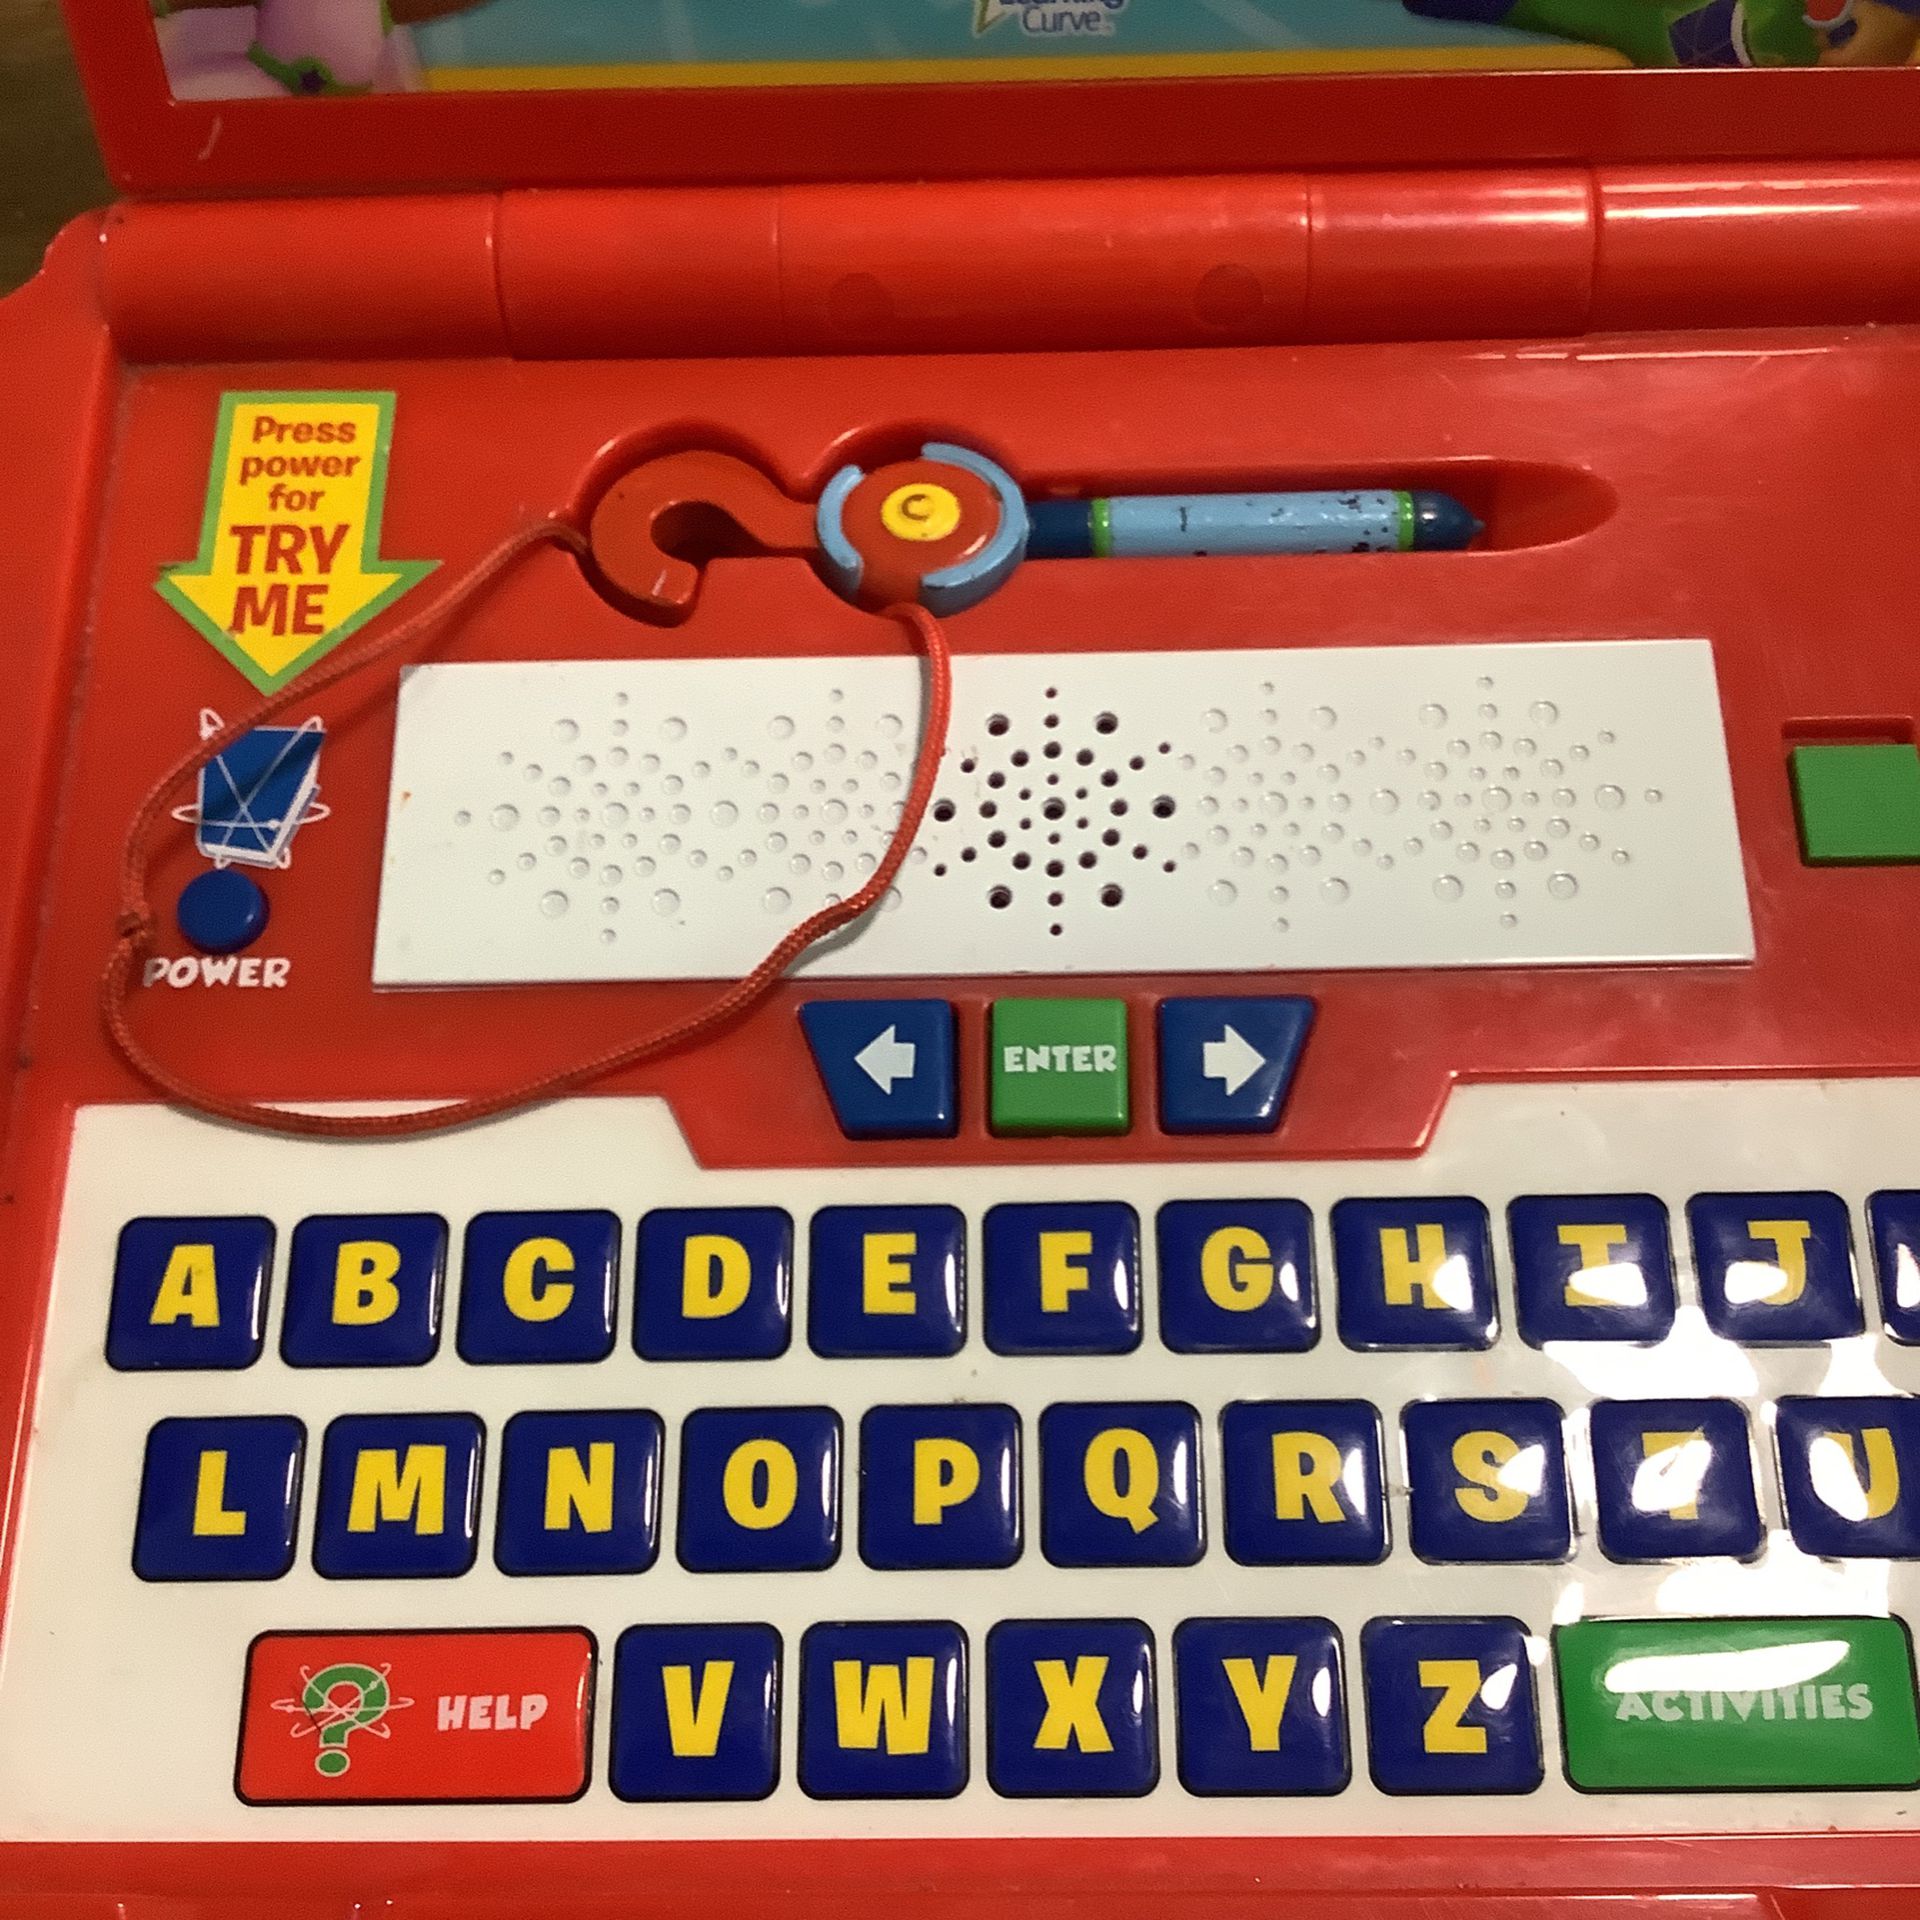 Vtech Laptop for Kids for Sale in Los Angeles, CA - OfferUp